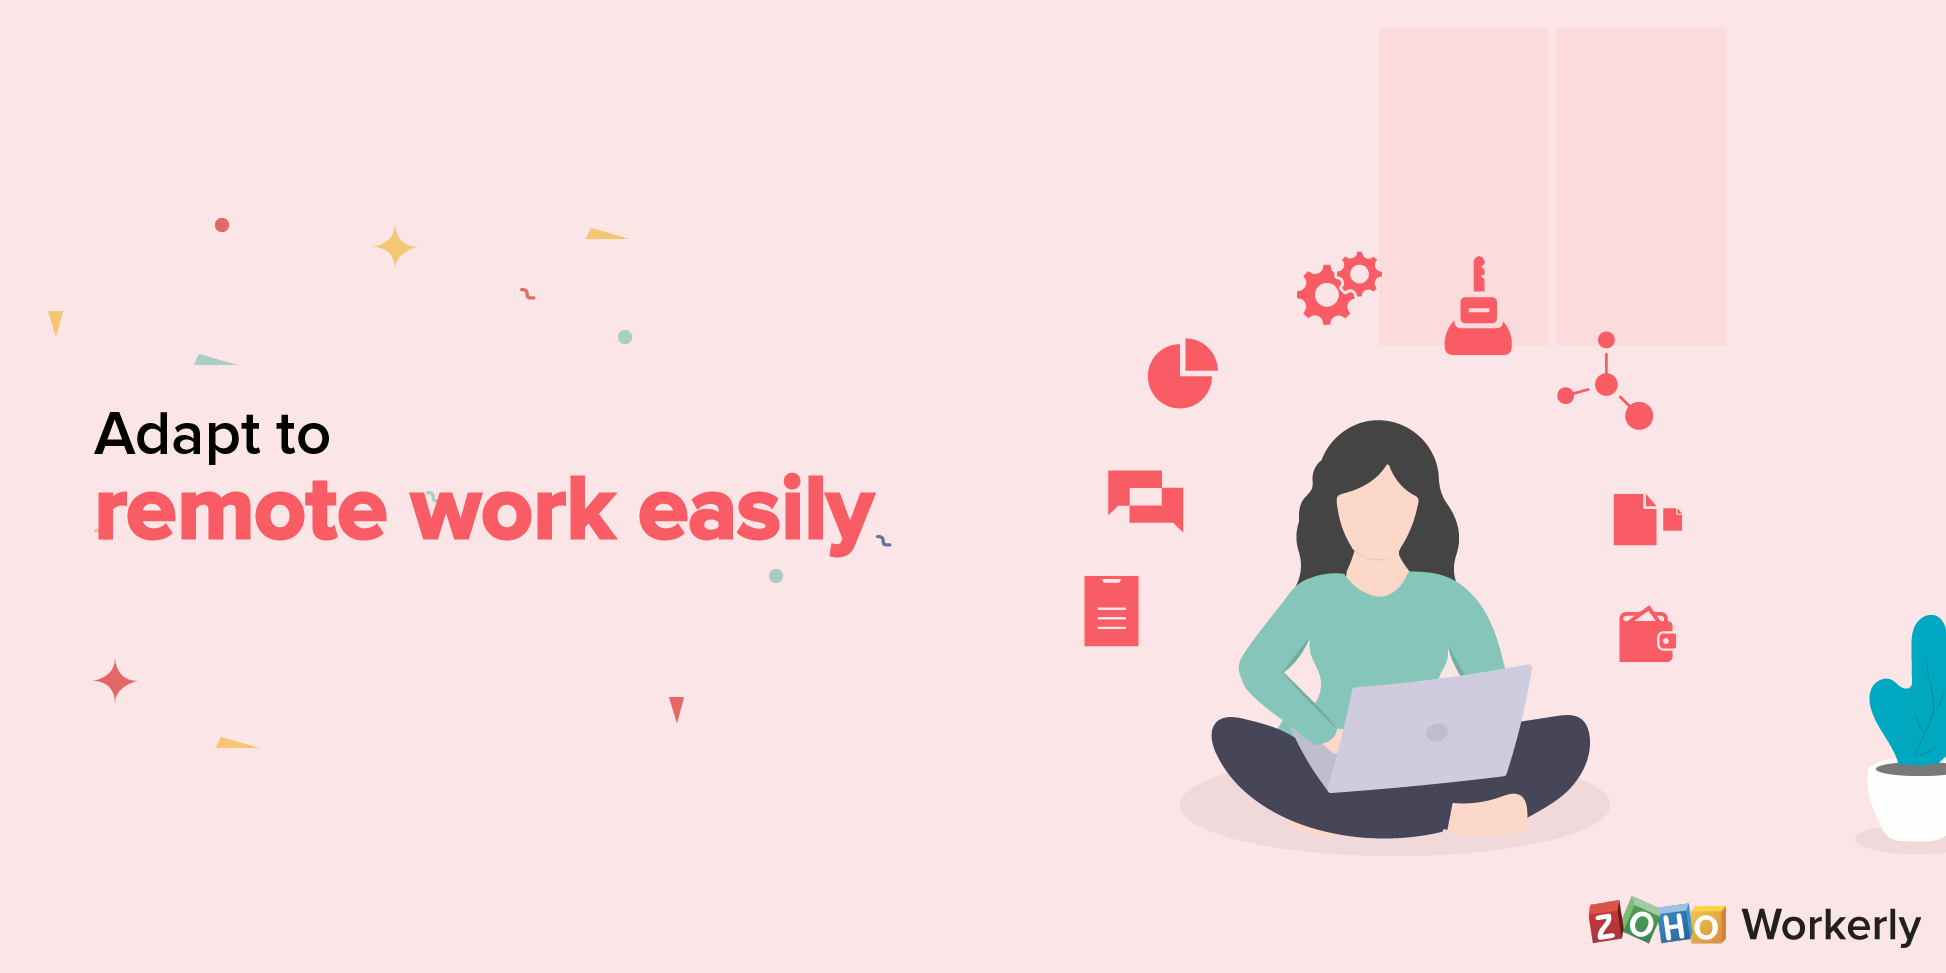 Here are 5 must-try features in Zoho Workerly for remote staffing